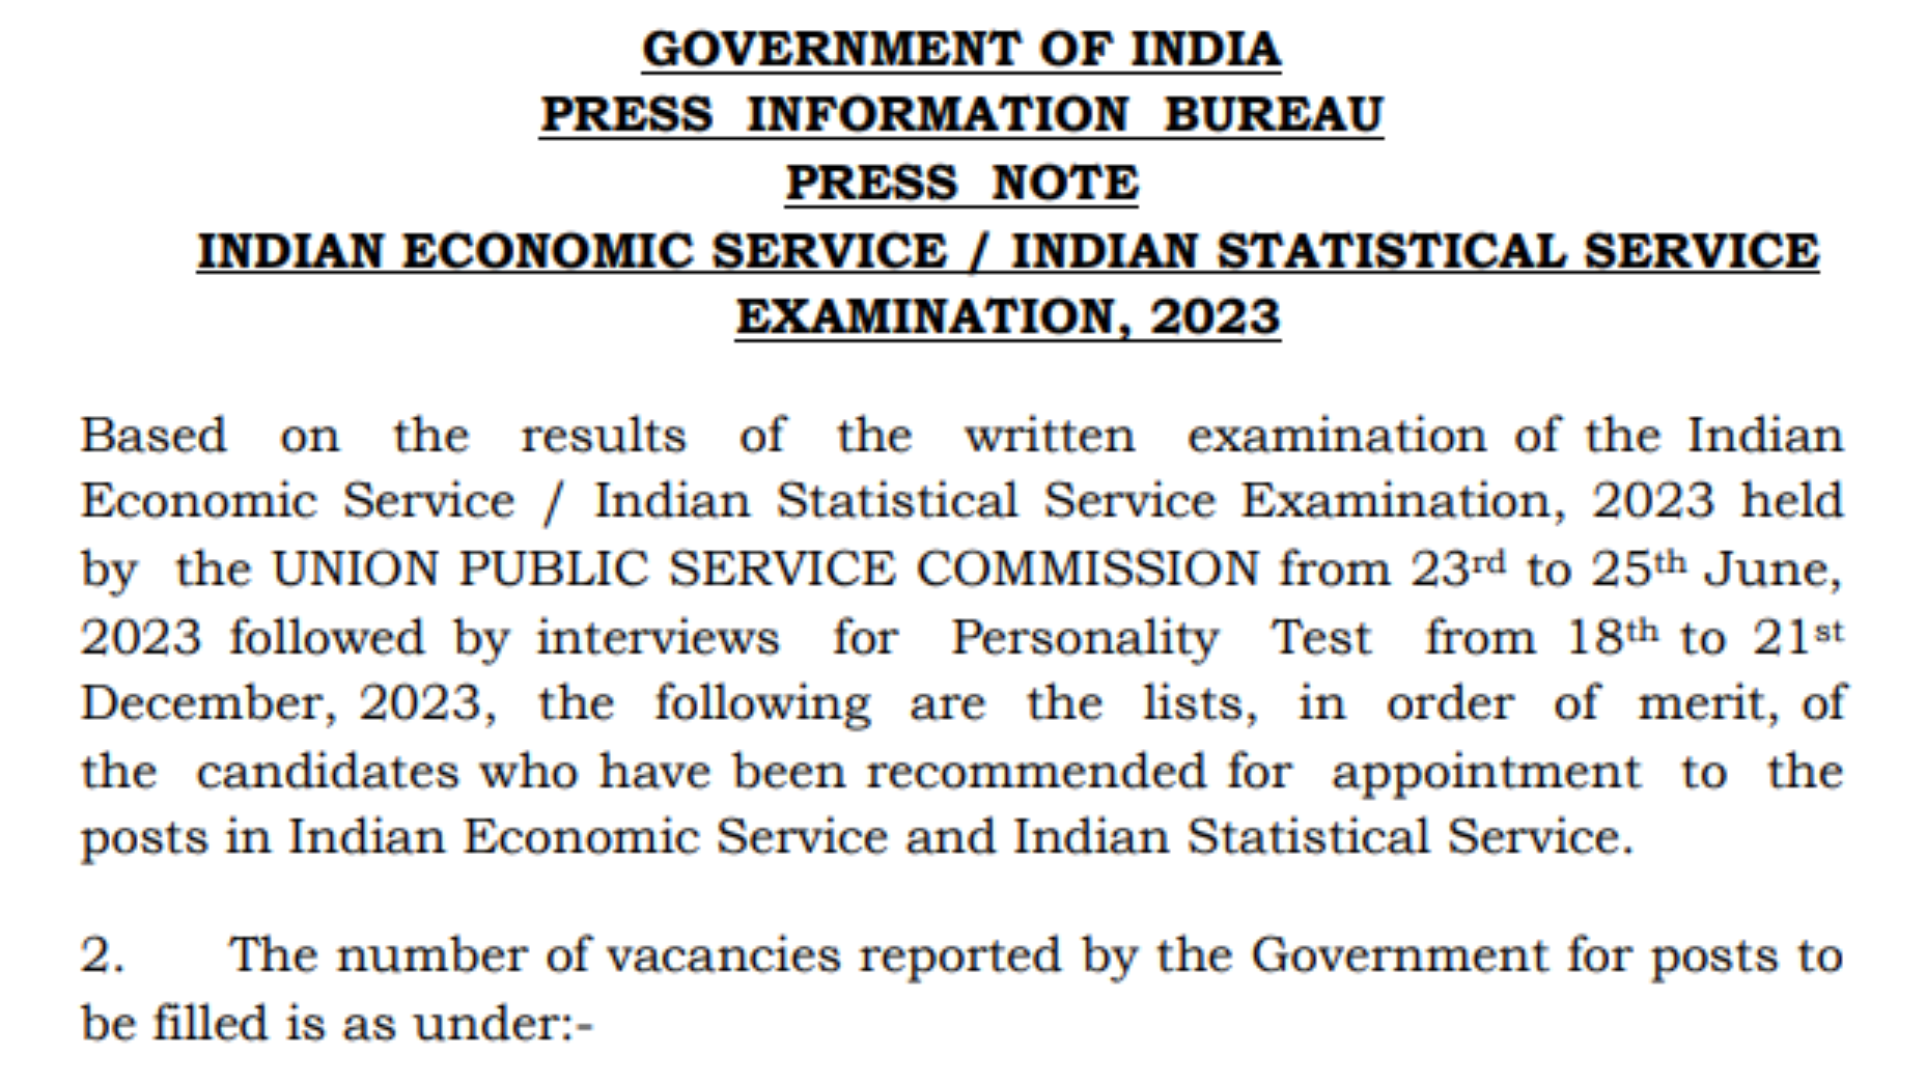 UPSC Indian Economic Service IES and Indian Statistical Service ISS Examination 2023 Final Result for 51 Post